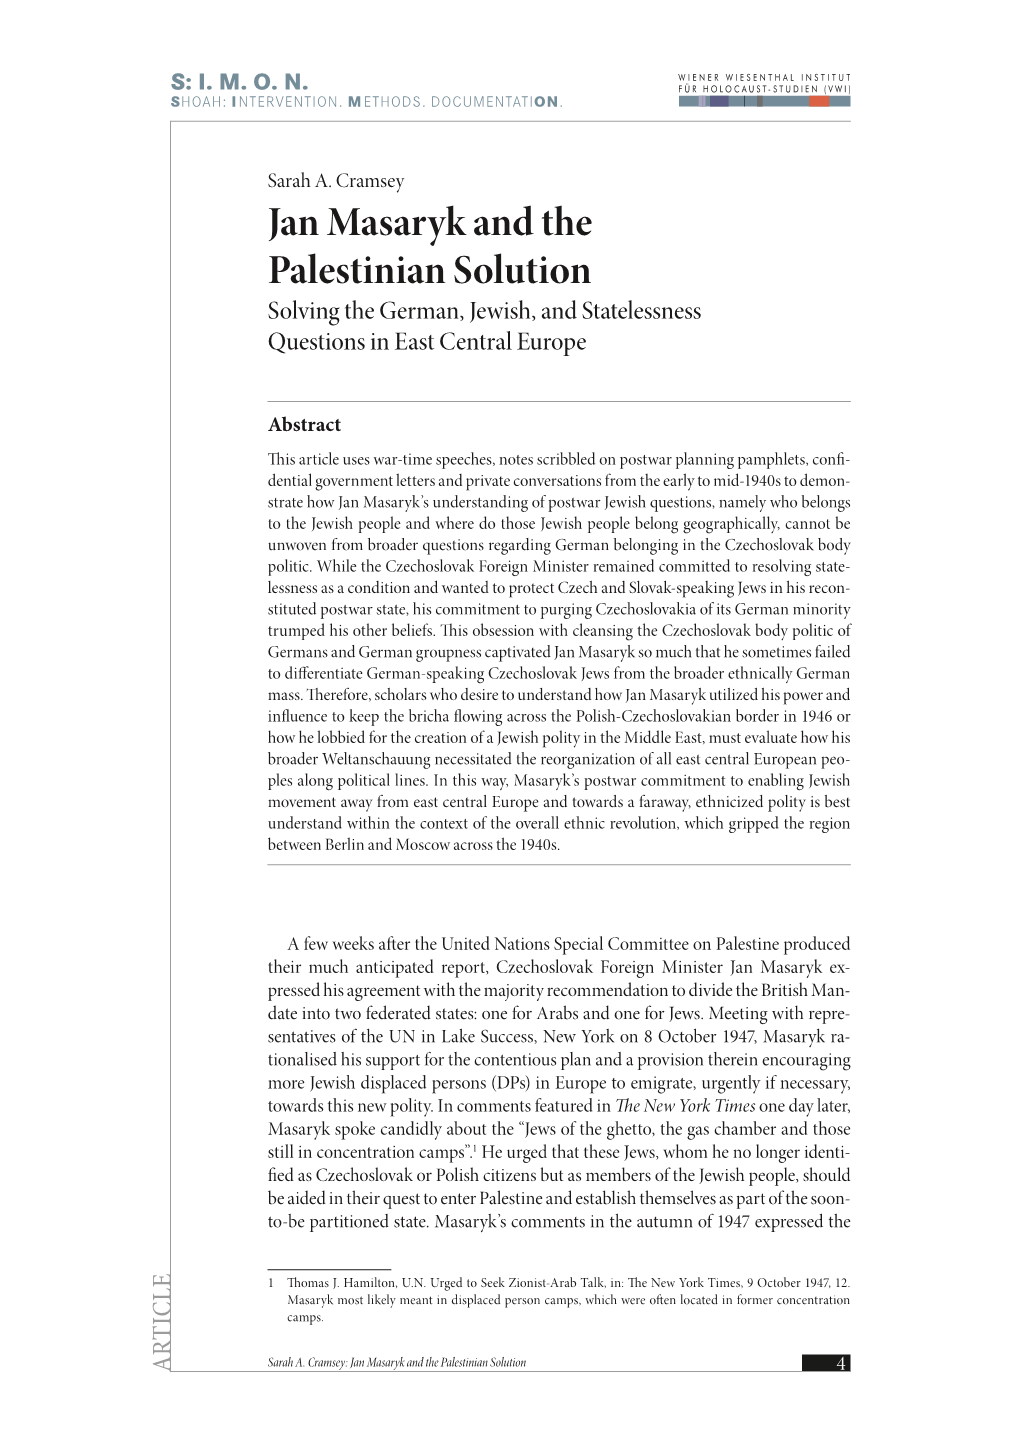 Jan Masaryk and the Palestinian Solution Solving the German, Jewish, and Statelessness Questions in East Central Europe